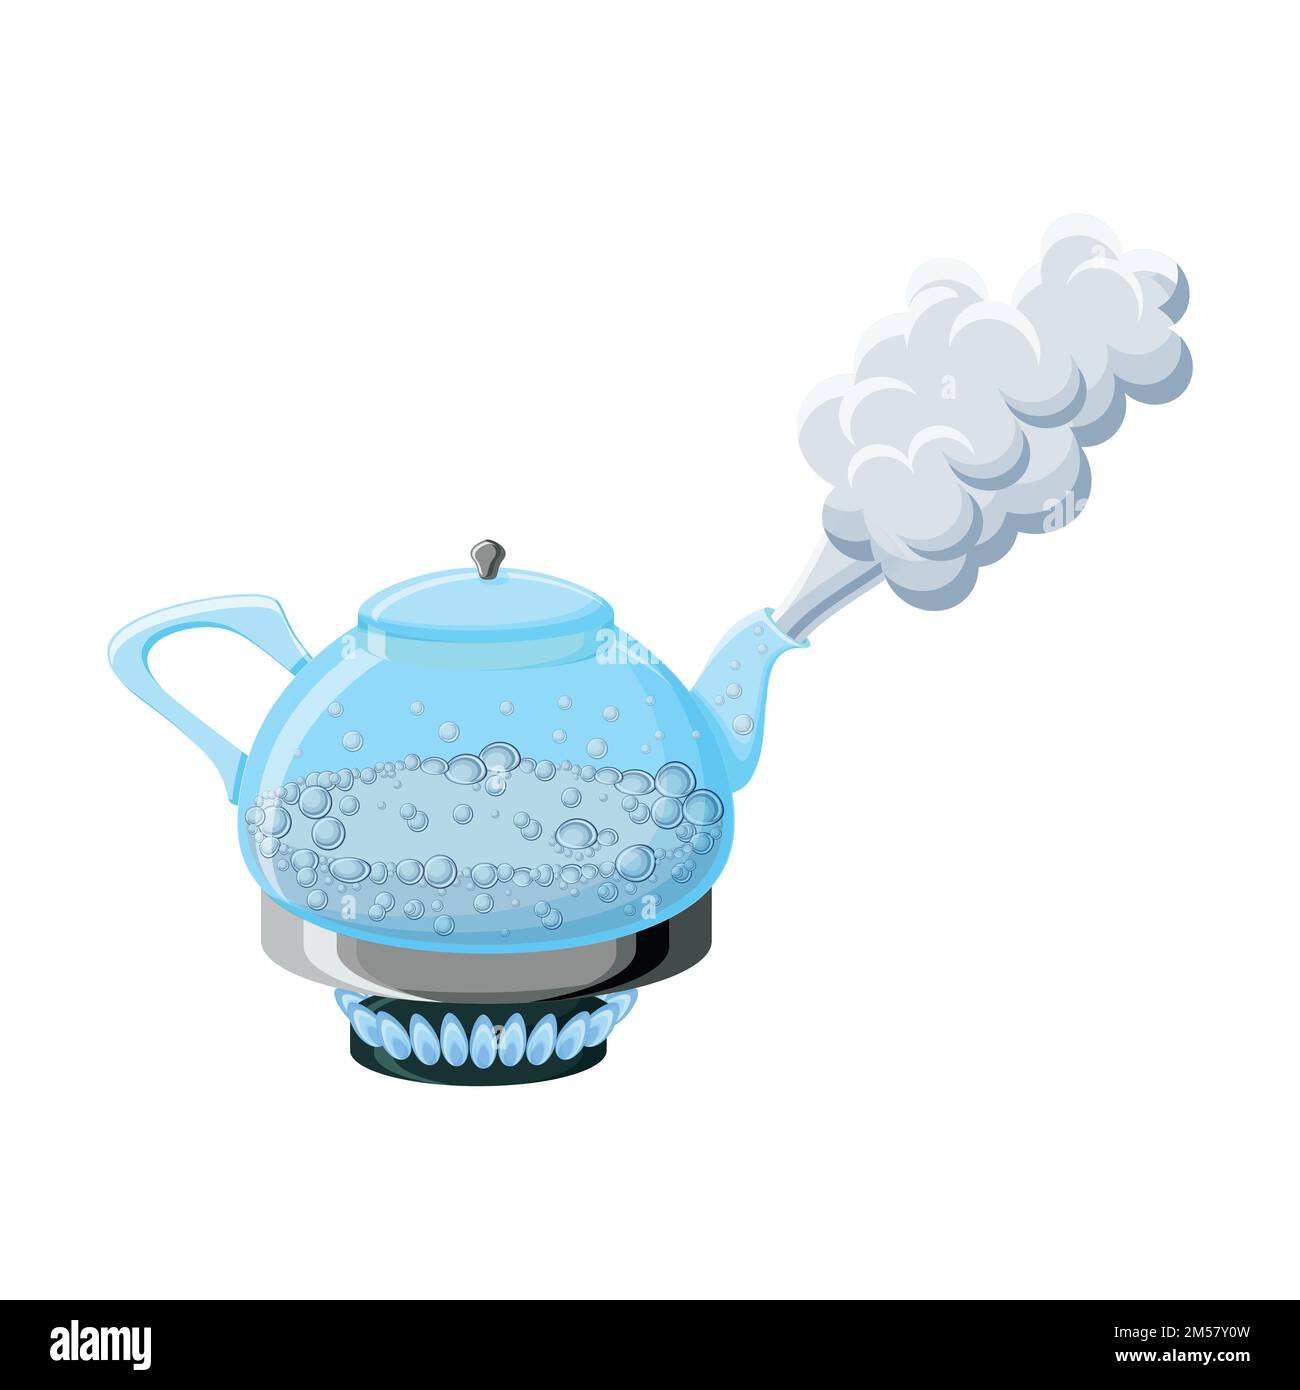 https://c8.alamy.com/comp/2M57Y0W/transparent-glass-kettle-with-boiling-water-and-steam-on-gas-stove-top-isolated-on-white-background-cartoon-vector-illustration-in-flat-style-2M57Y0W.jpg